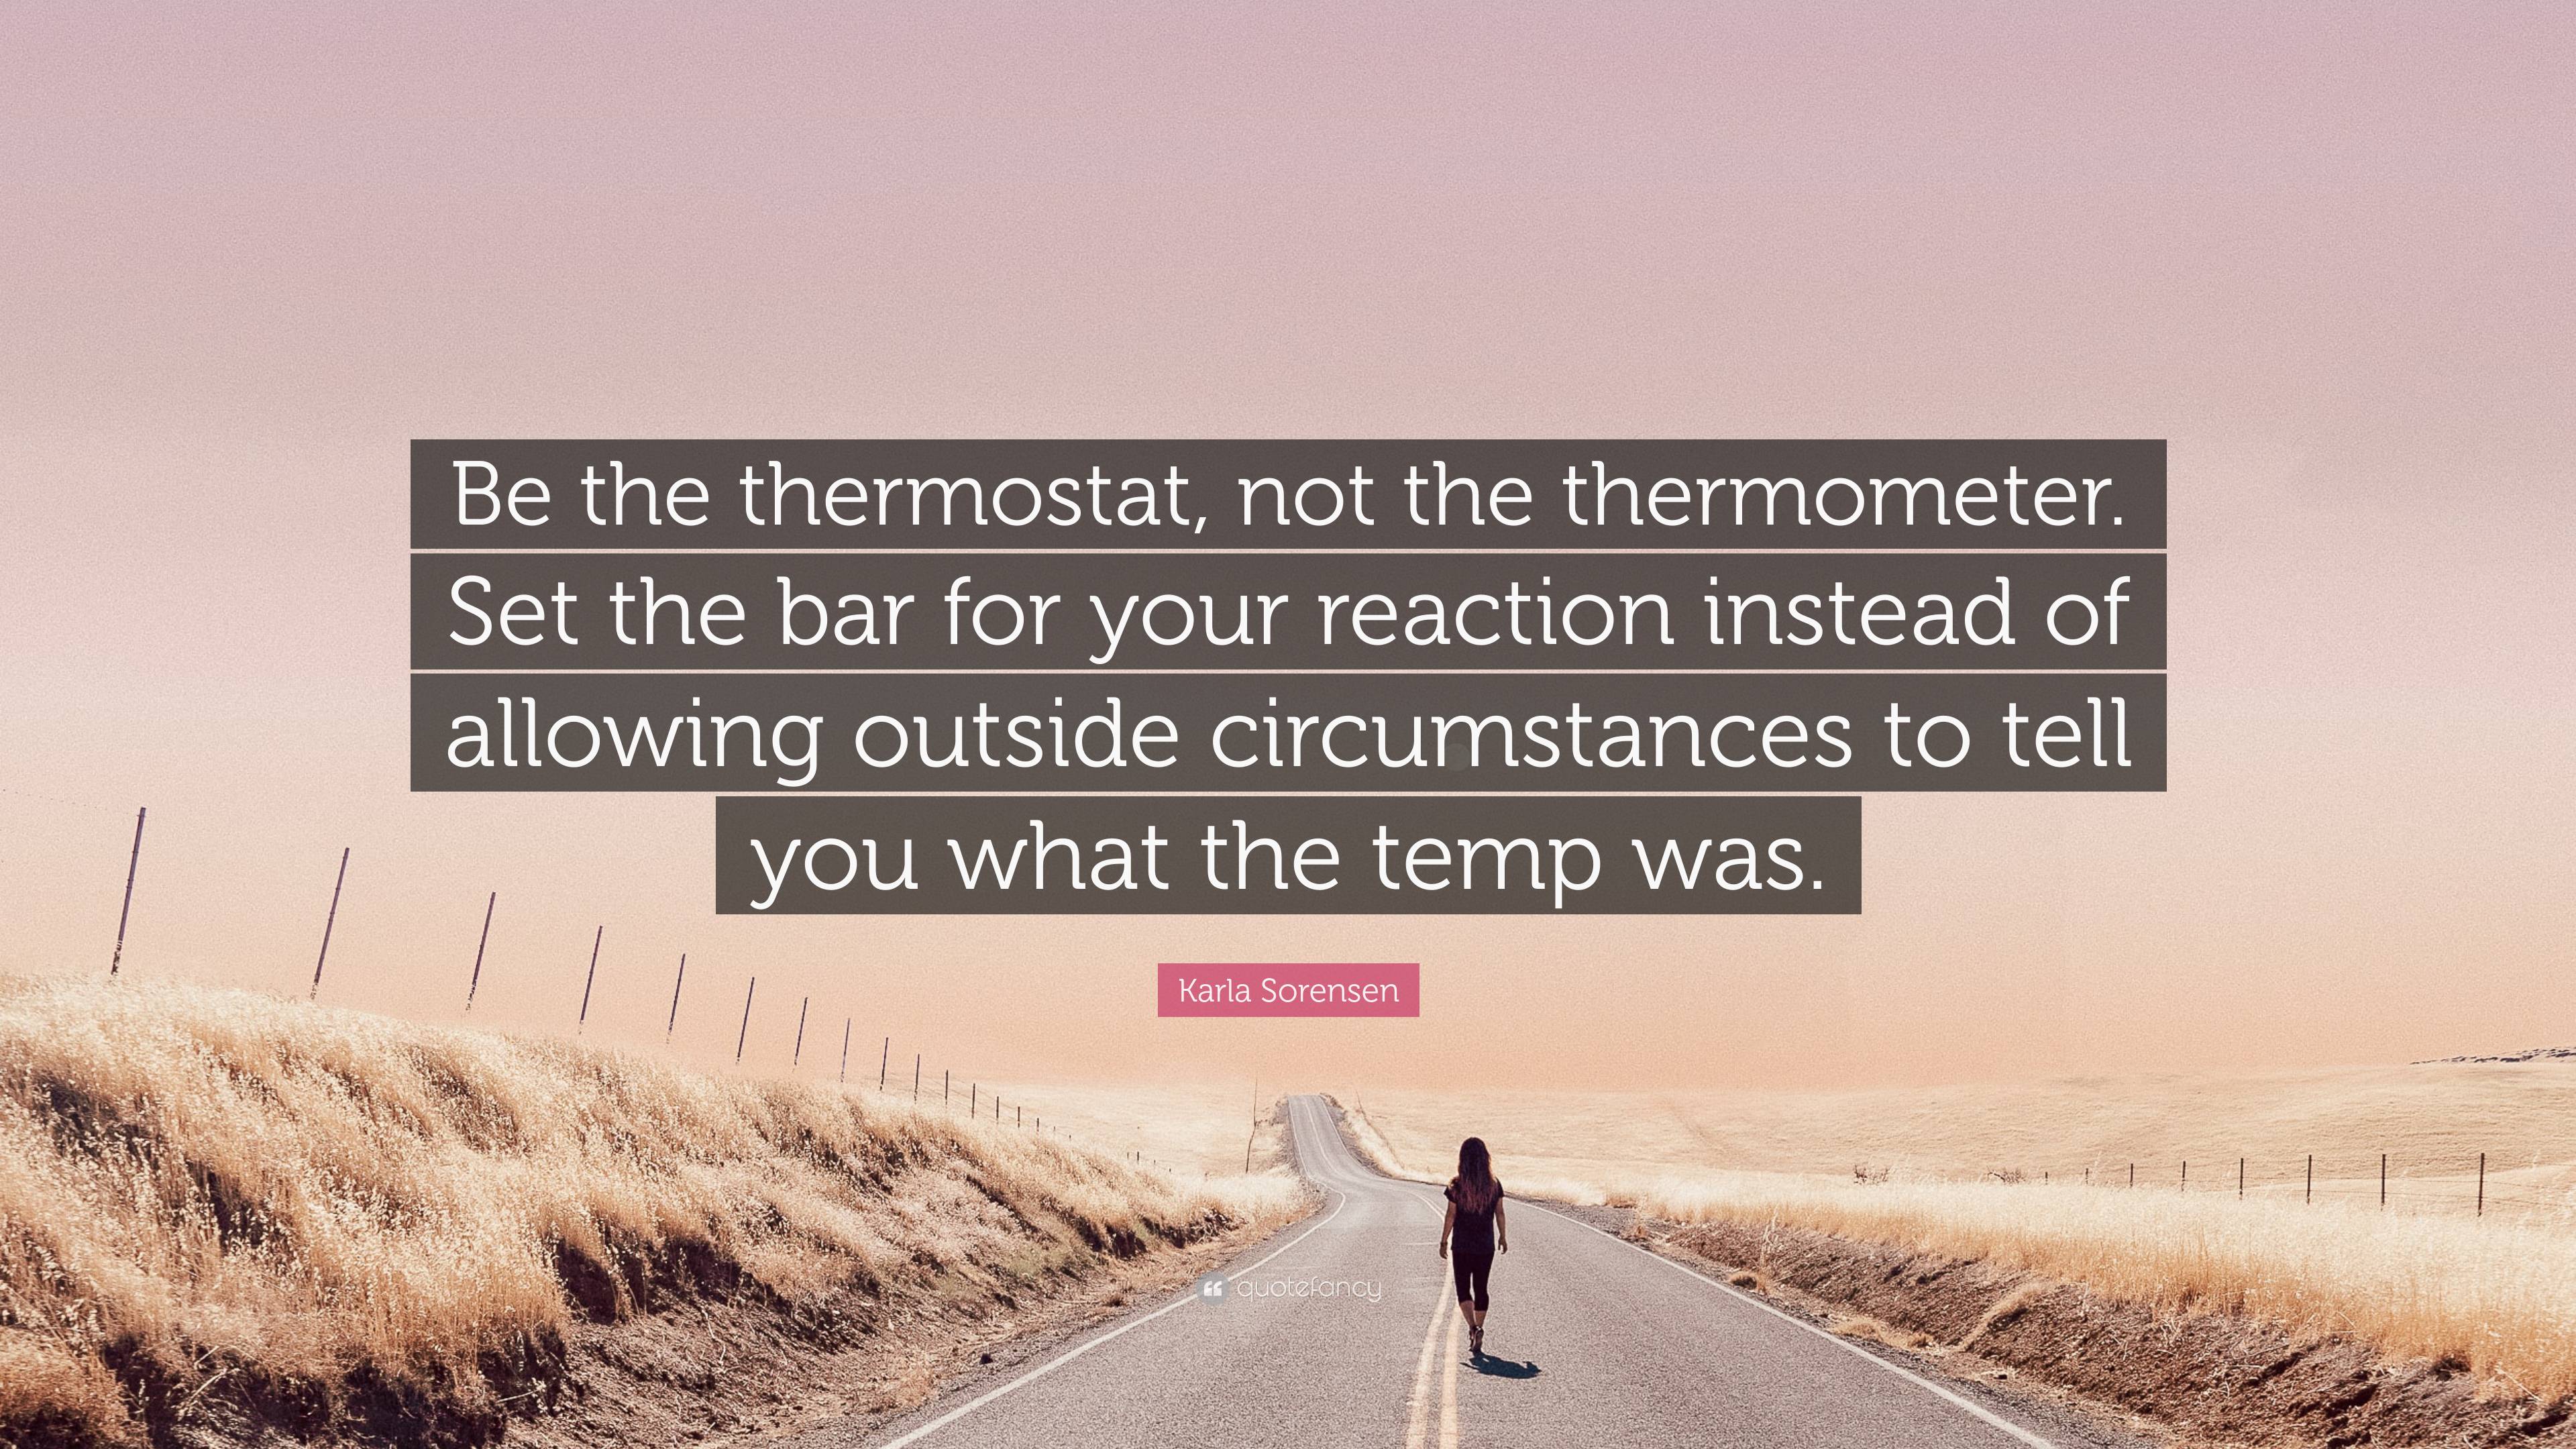 Be a Thermostat, Not a Thermometer